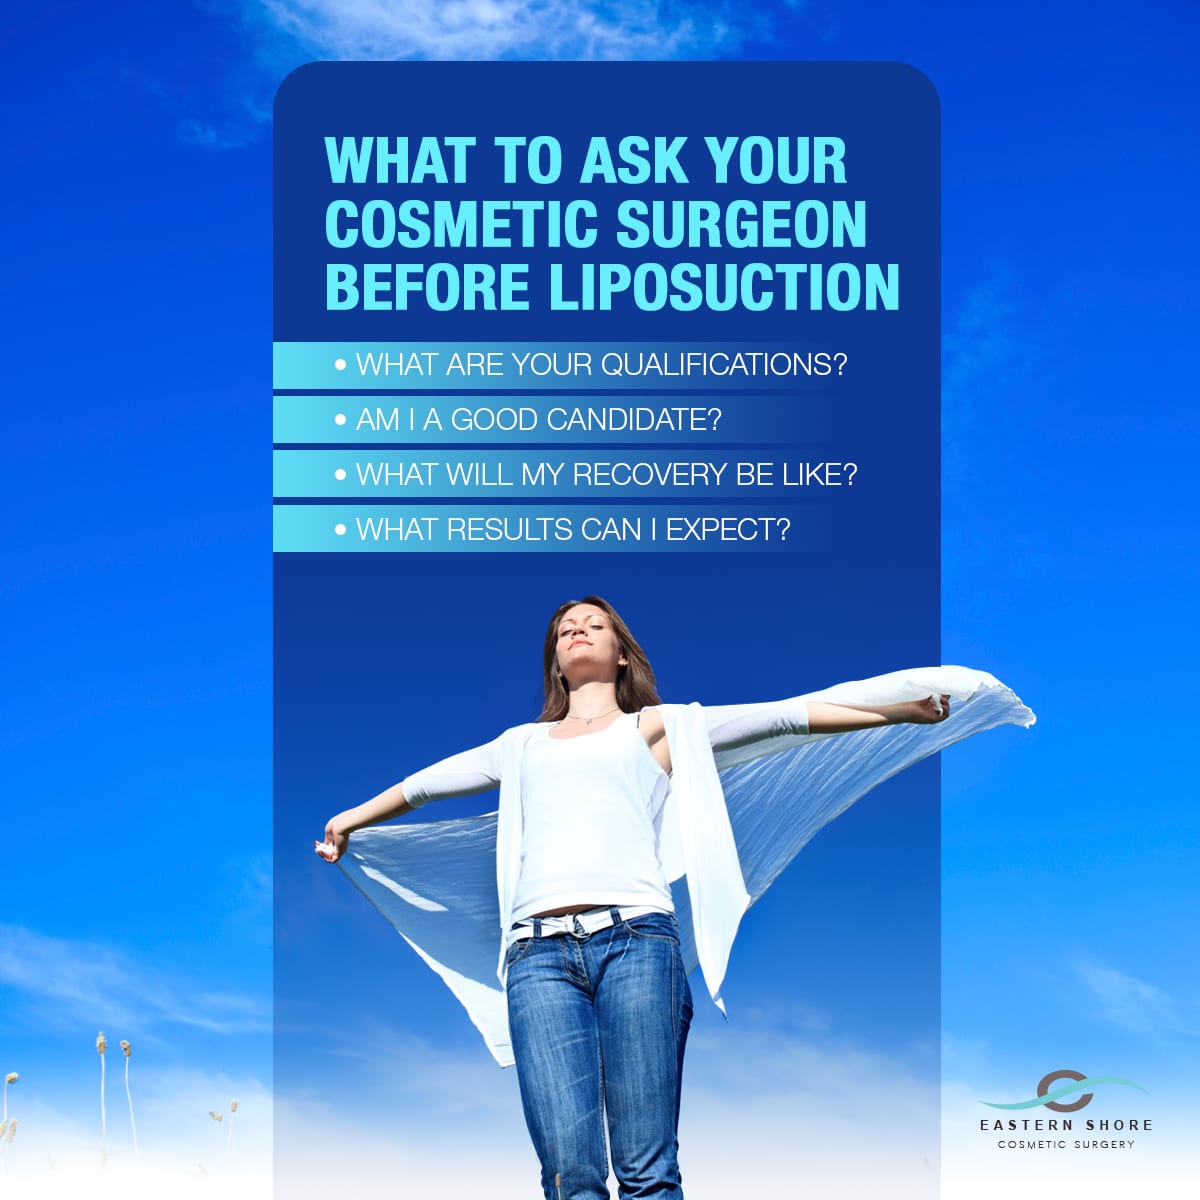 What To Ask Your Cosmetic Surgeon Before Liposuction [Infographic]